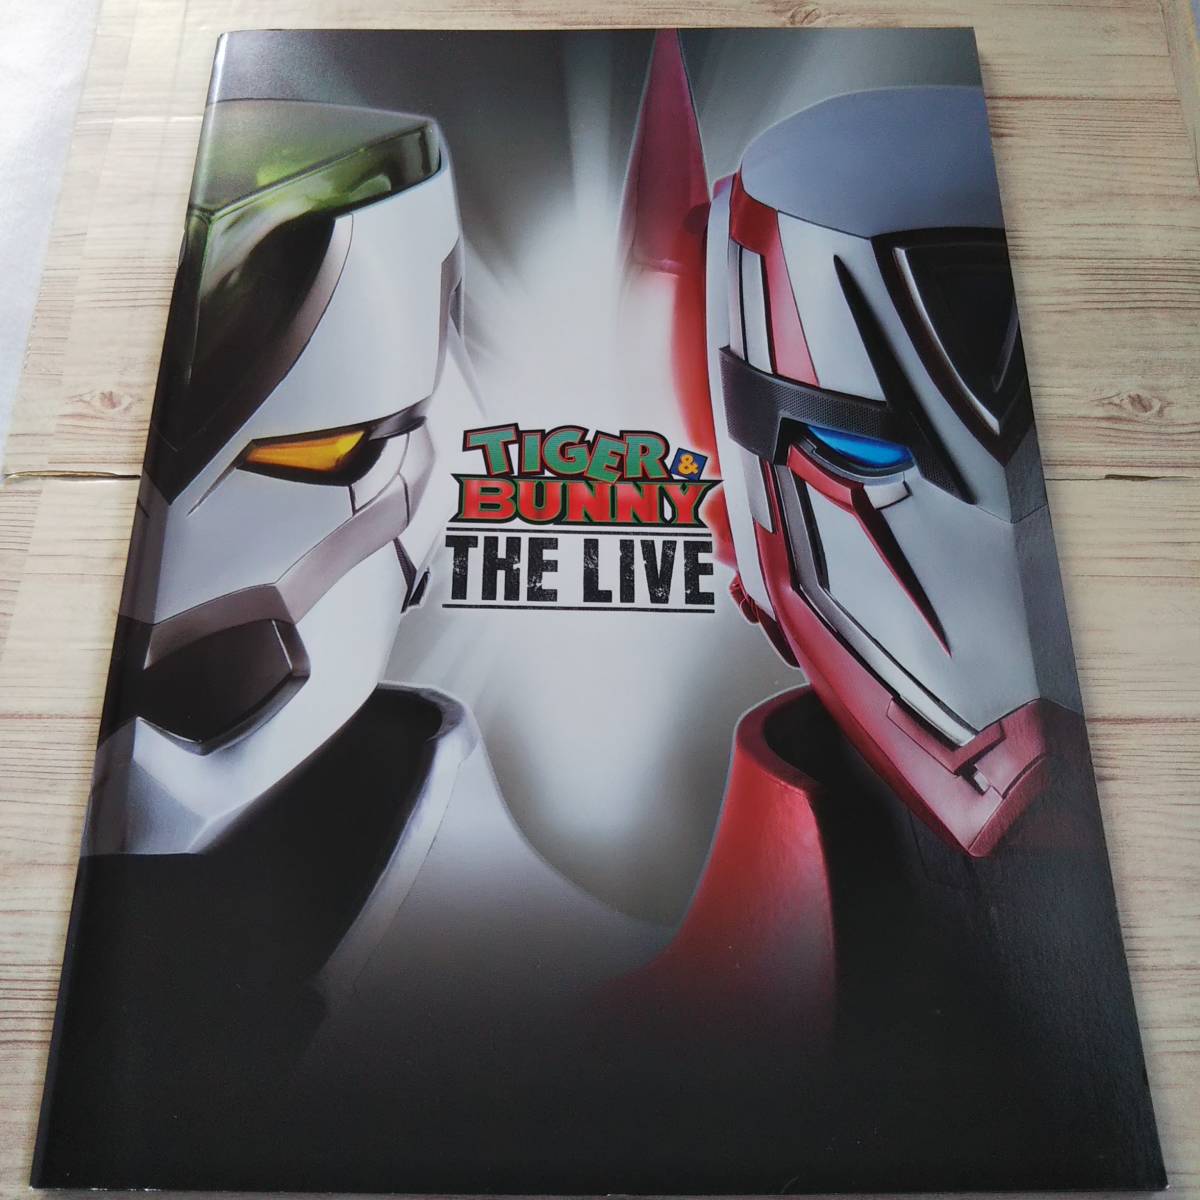 TIGER＆BUNNY THE LIVE パンフレット 所々ダメージ有り の商品詳細  日本・アメリカのオークション・通販ショッピングの代理入札・購入お得な情報をお届け One Map by FROM JAPAN|日本代理購入